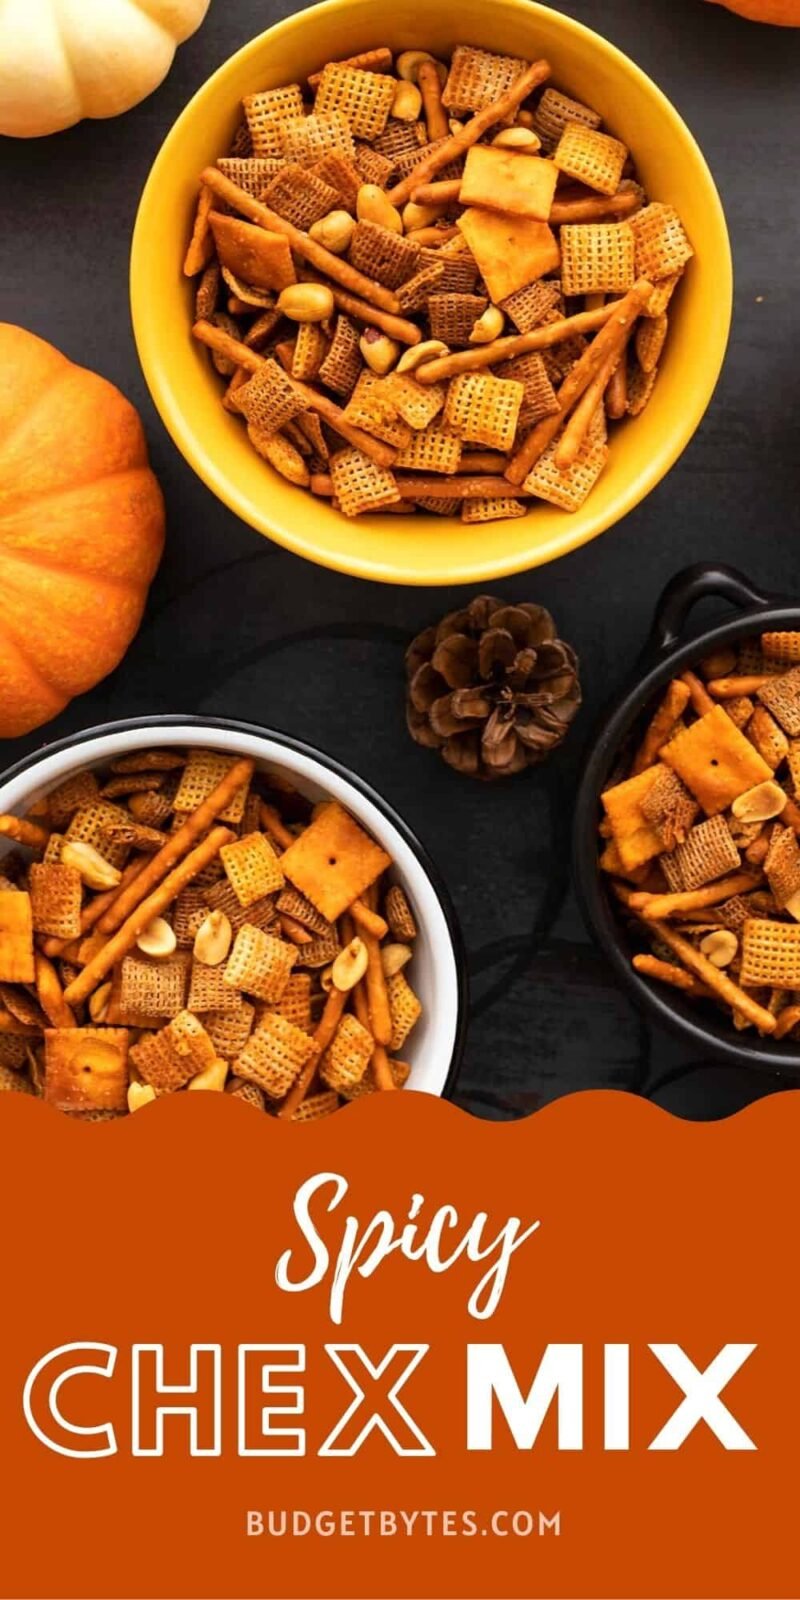 Spicy chex mix in three bowls, title text at the bottom